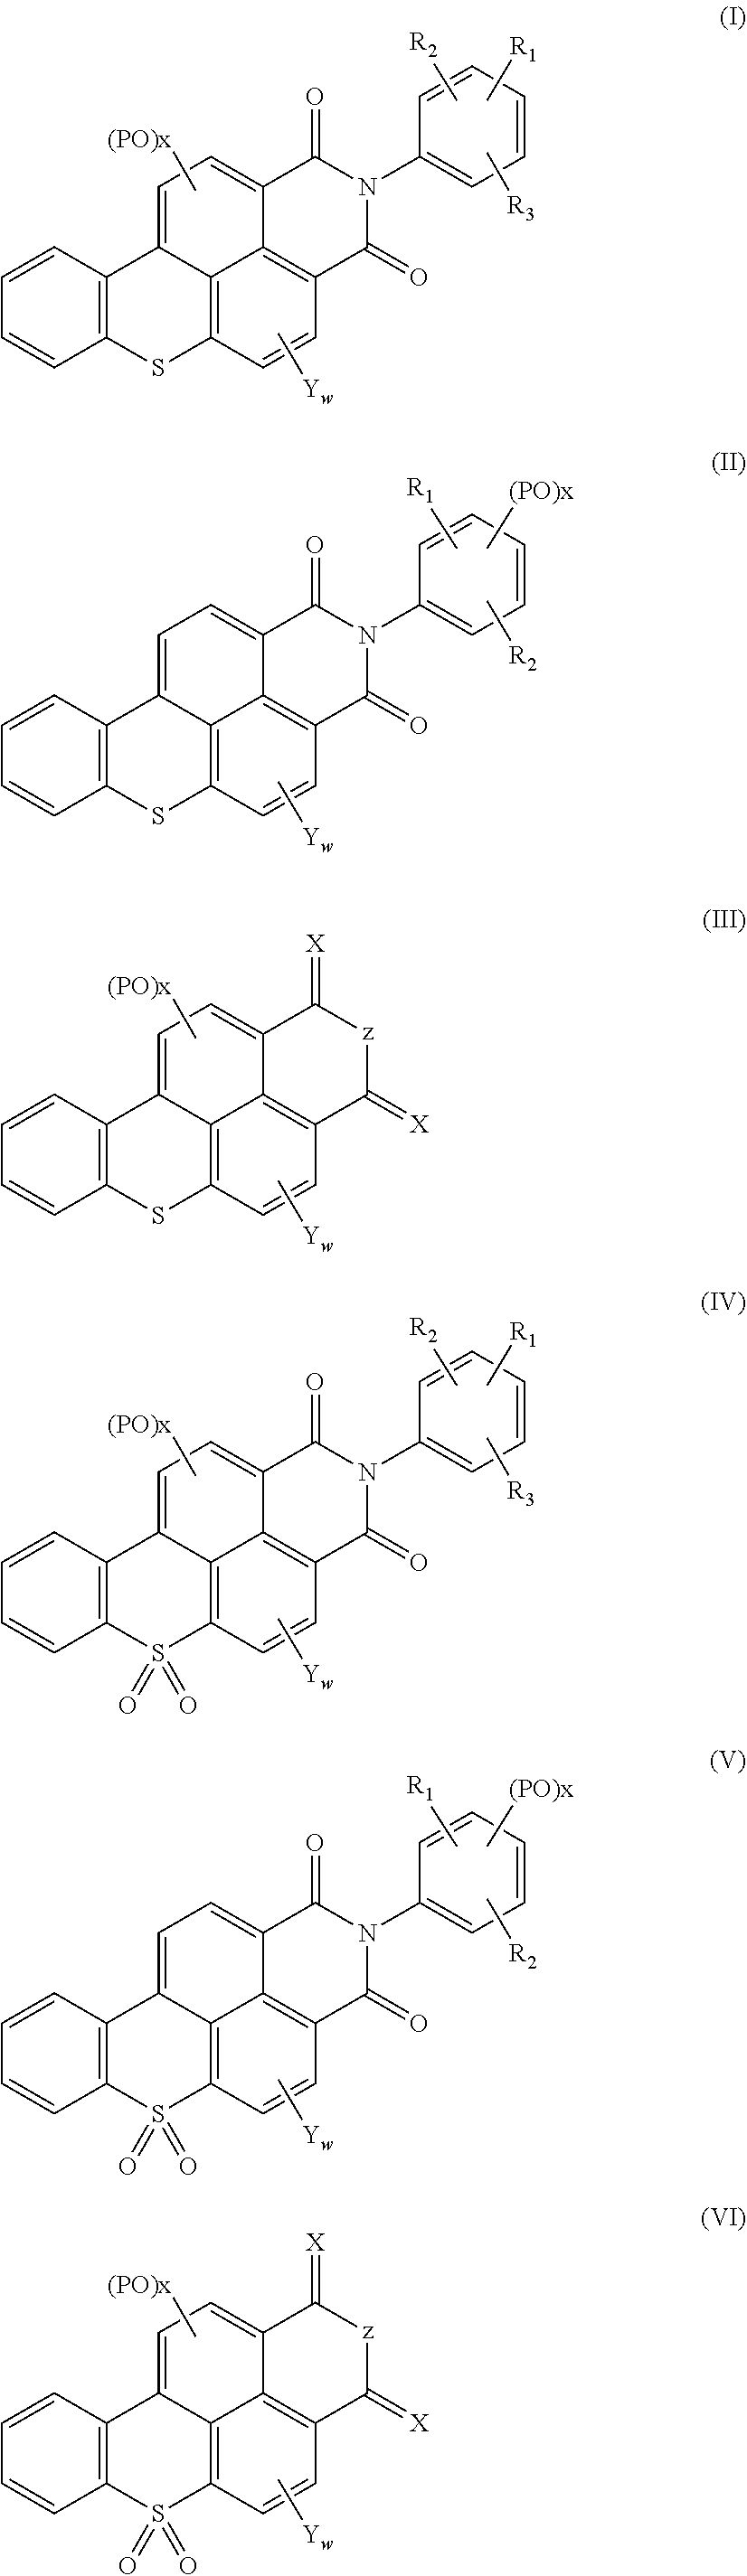 Polycyclic aromatic hydrocarbon compounds containing an S atom or S(═O)<sub>2 </sub>group in their basic structure